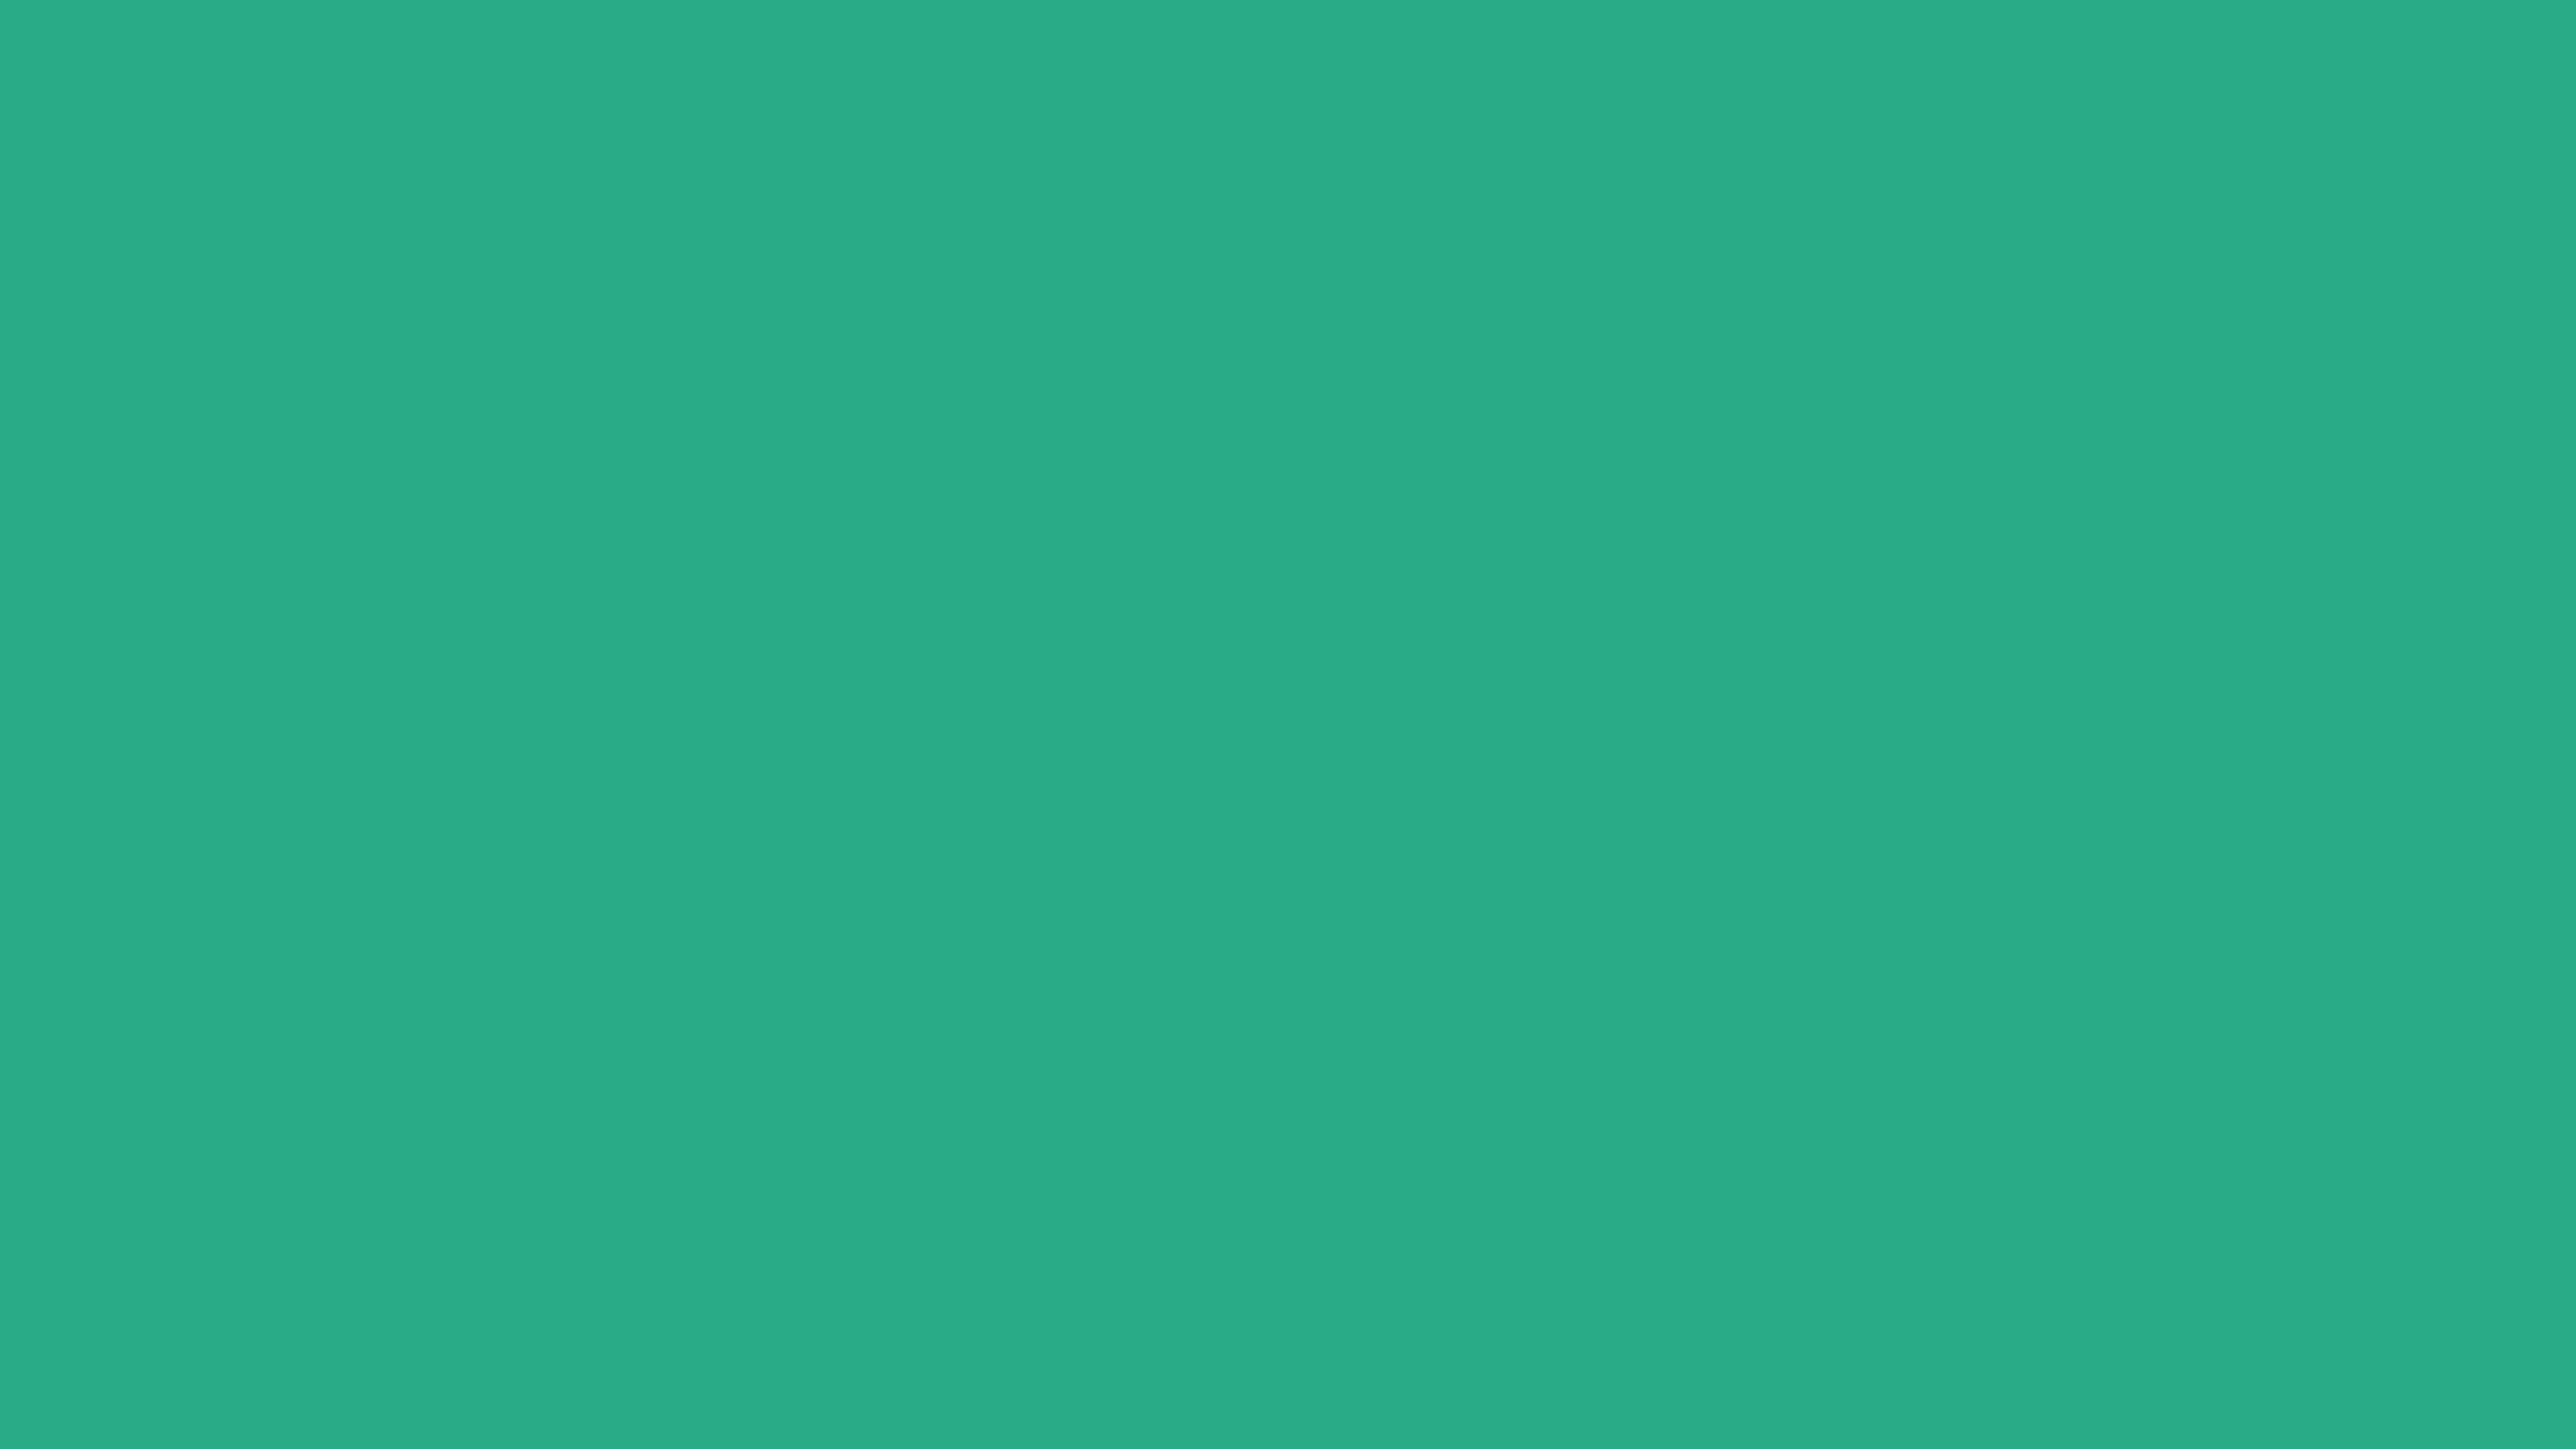 7680x4320 Jungle Green Solid Color Background